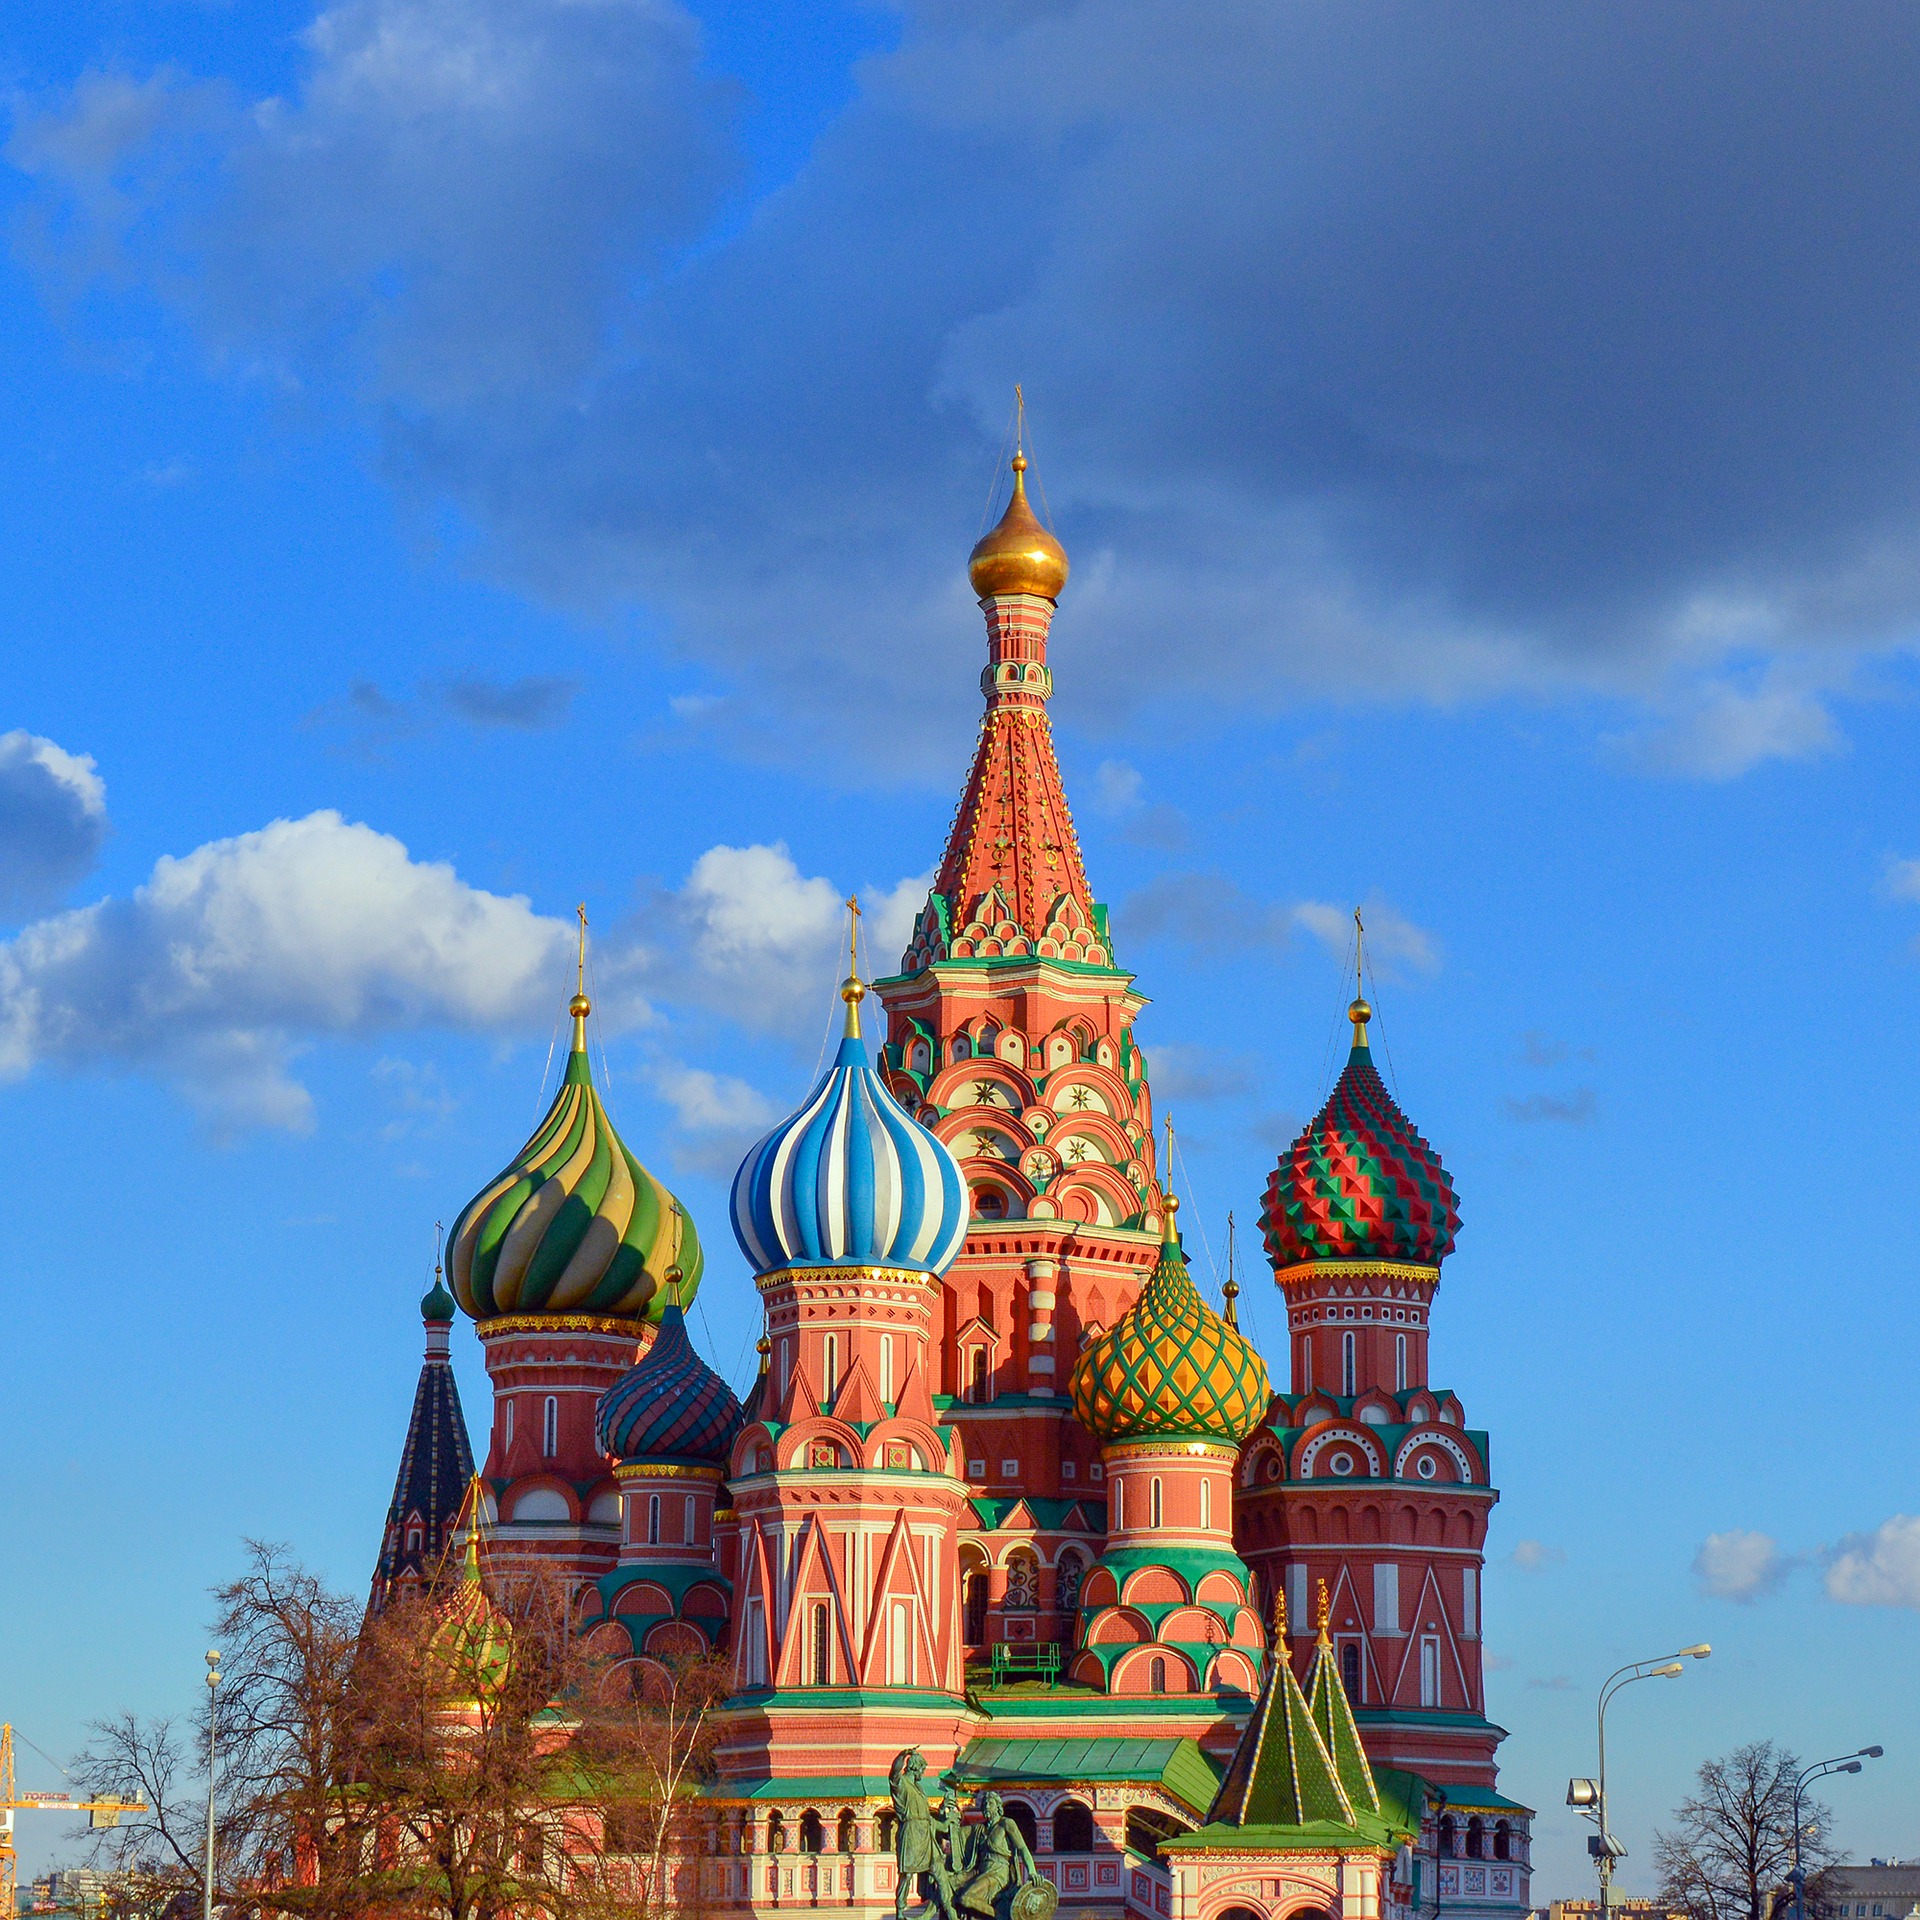 Saint Basil's Cathedral, Red Square, Moscow, Russia